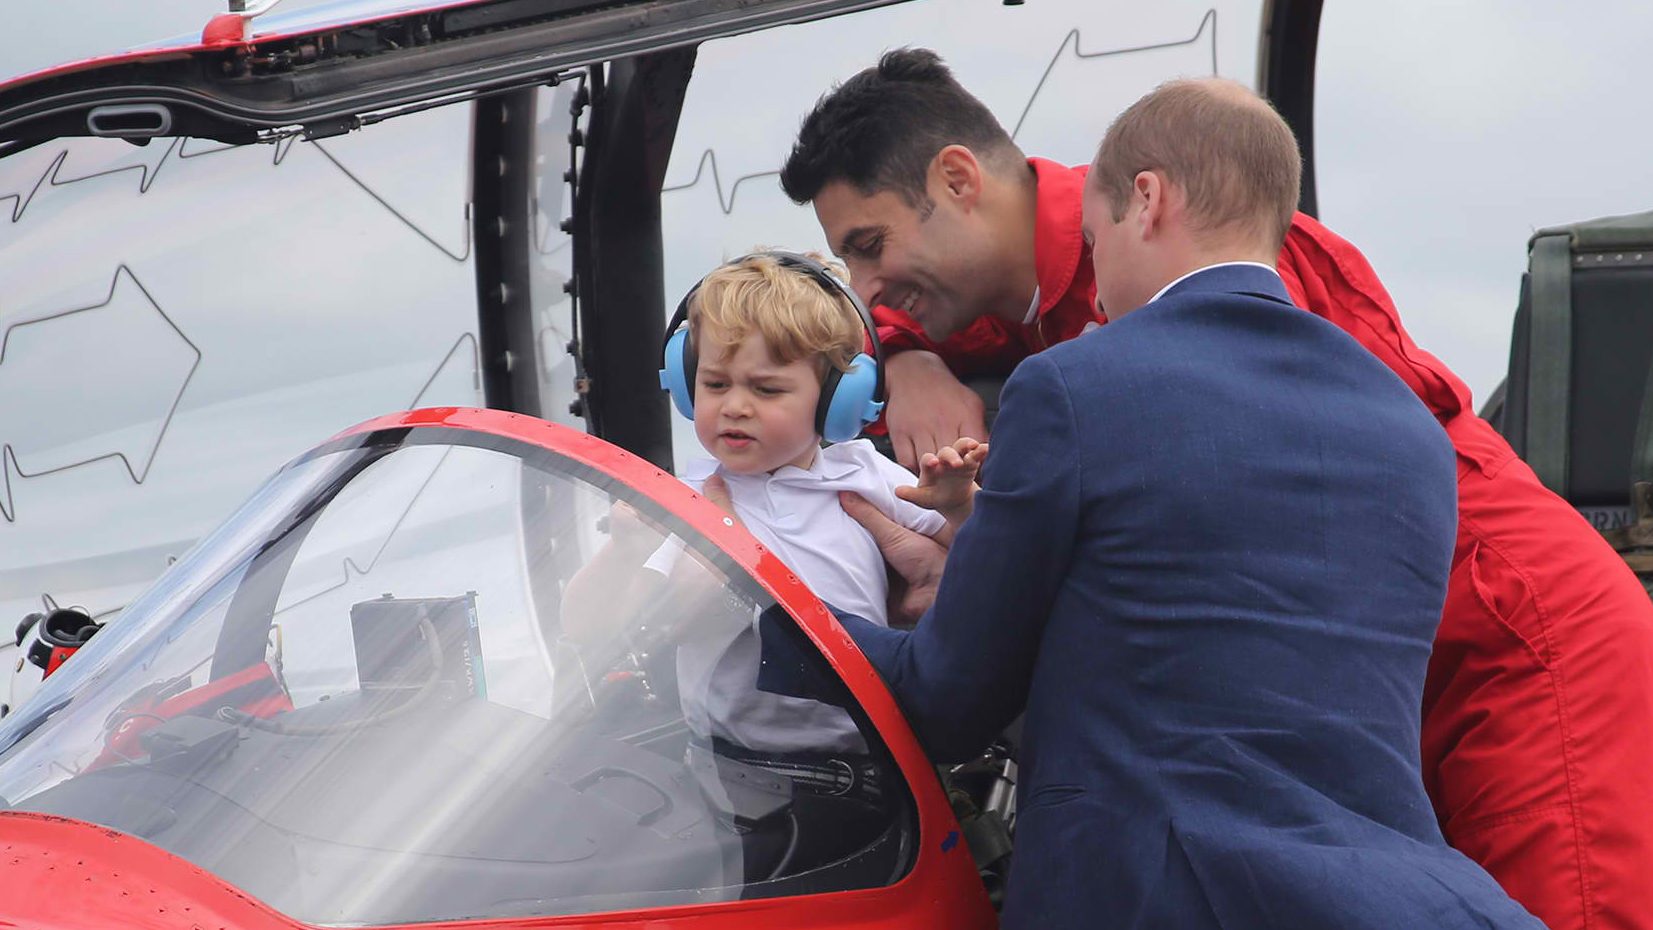 IN PHOTOS: Prince George gets to ‘pilot’ a jet